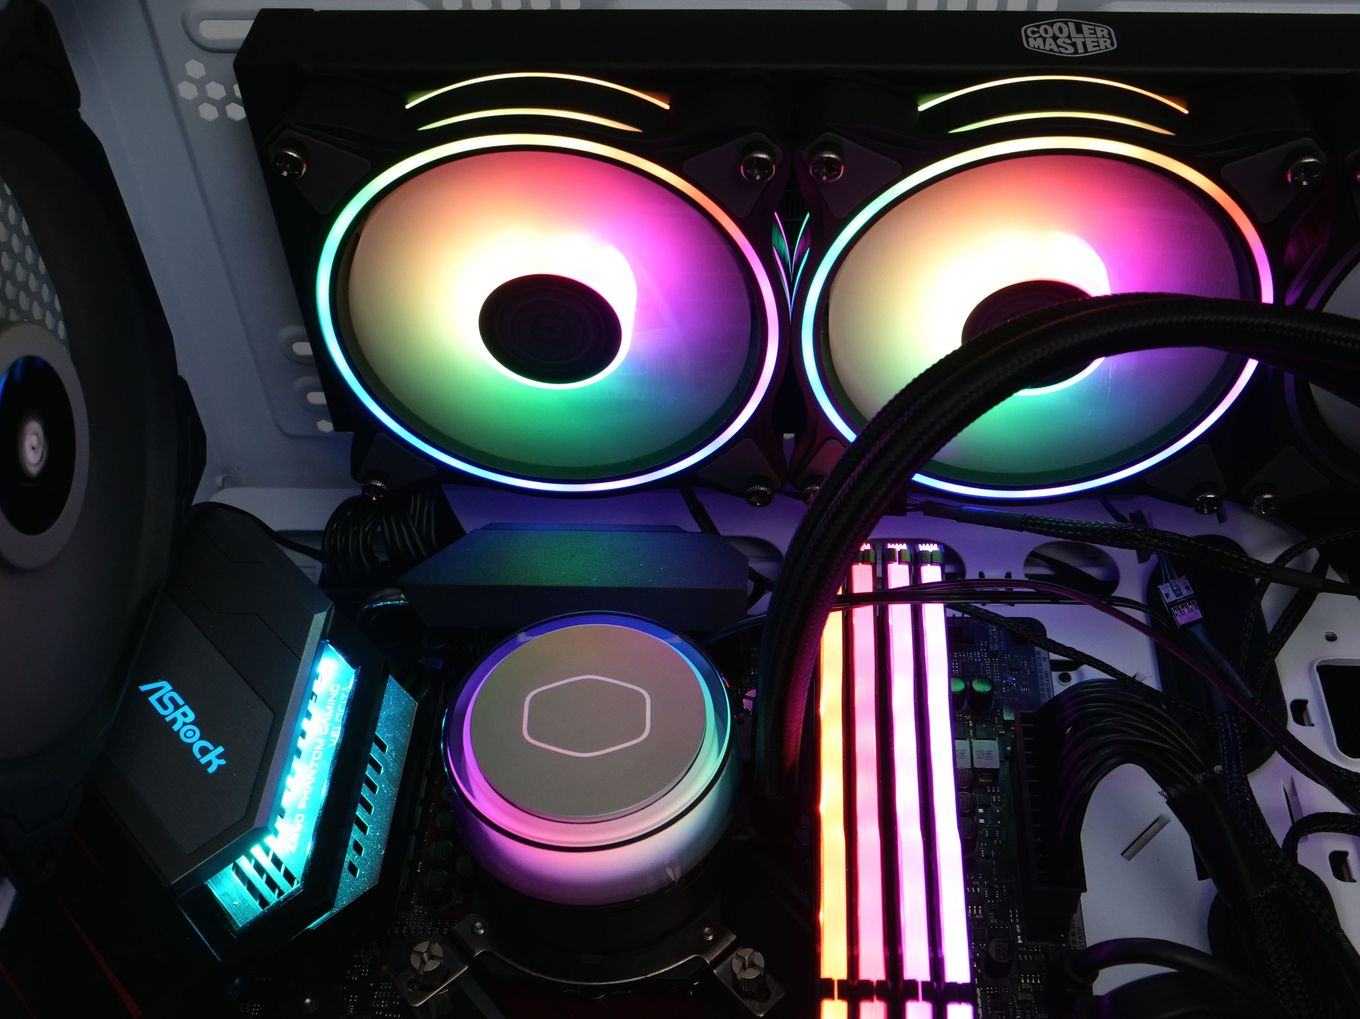 Nzxt kraken x73 rgb aio review: exceptional cooling performance with flashing lights | windows central